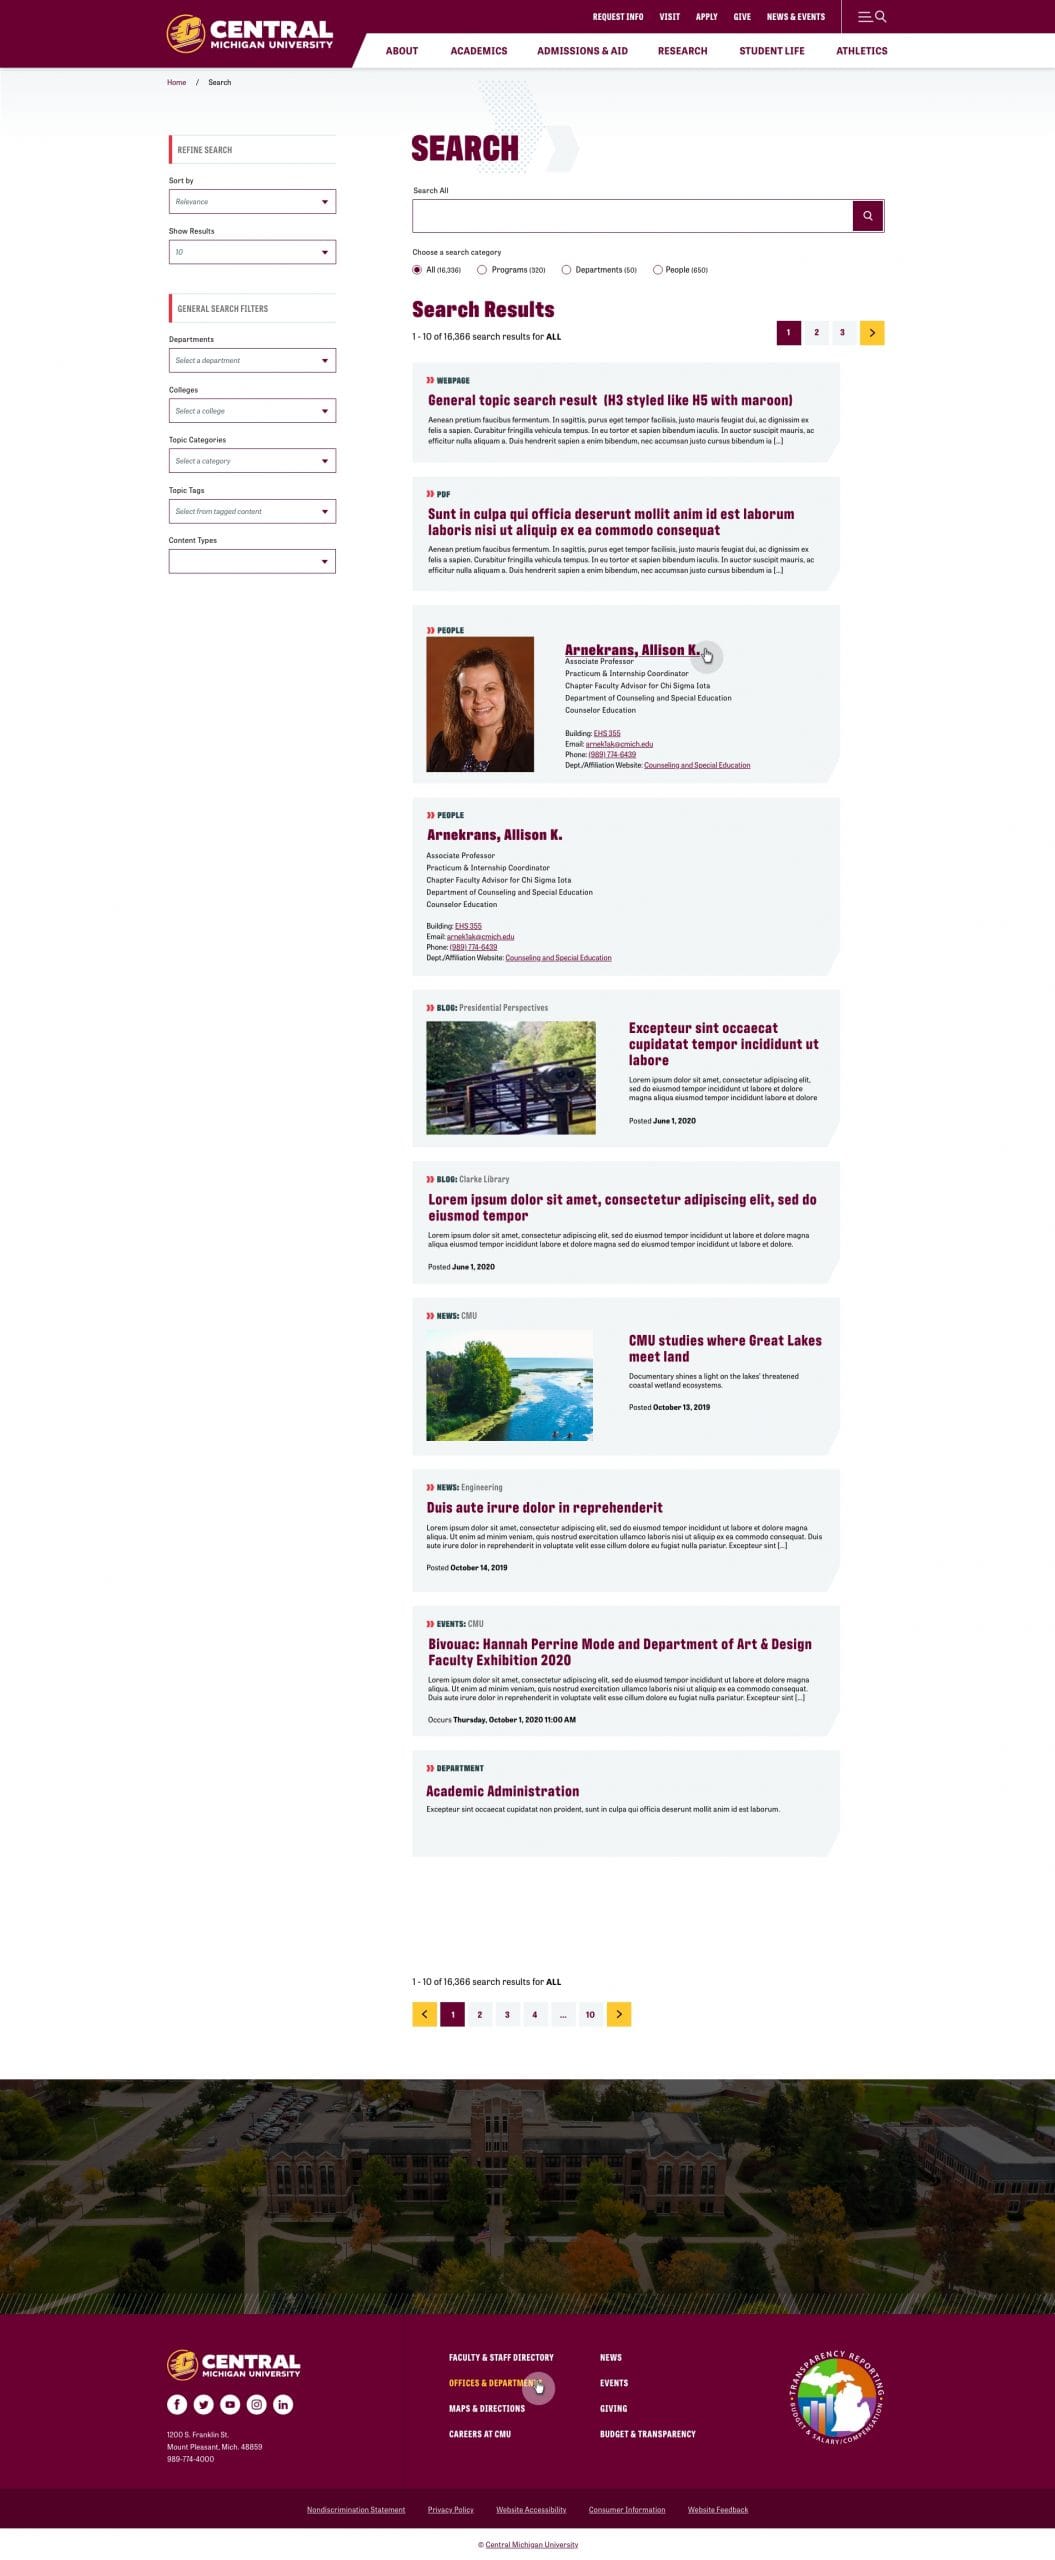 A full-page screenshot of the new Central Michigan University website site search results.